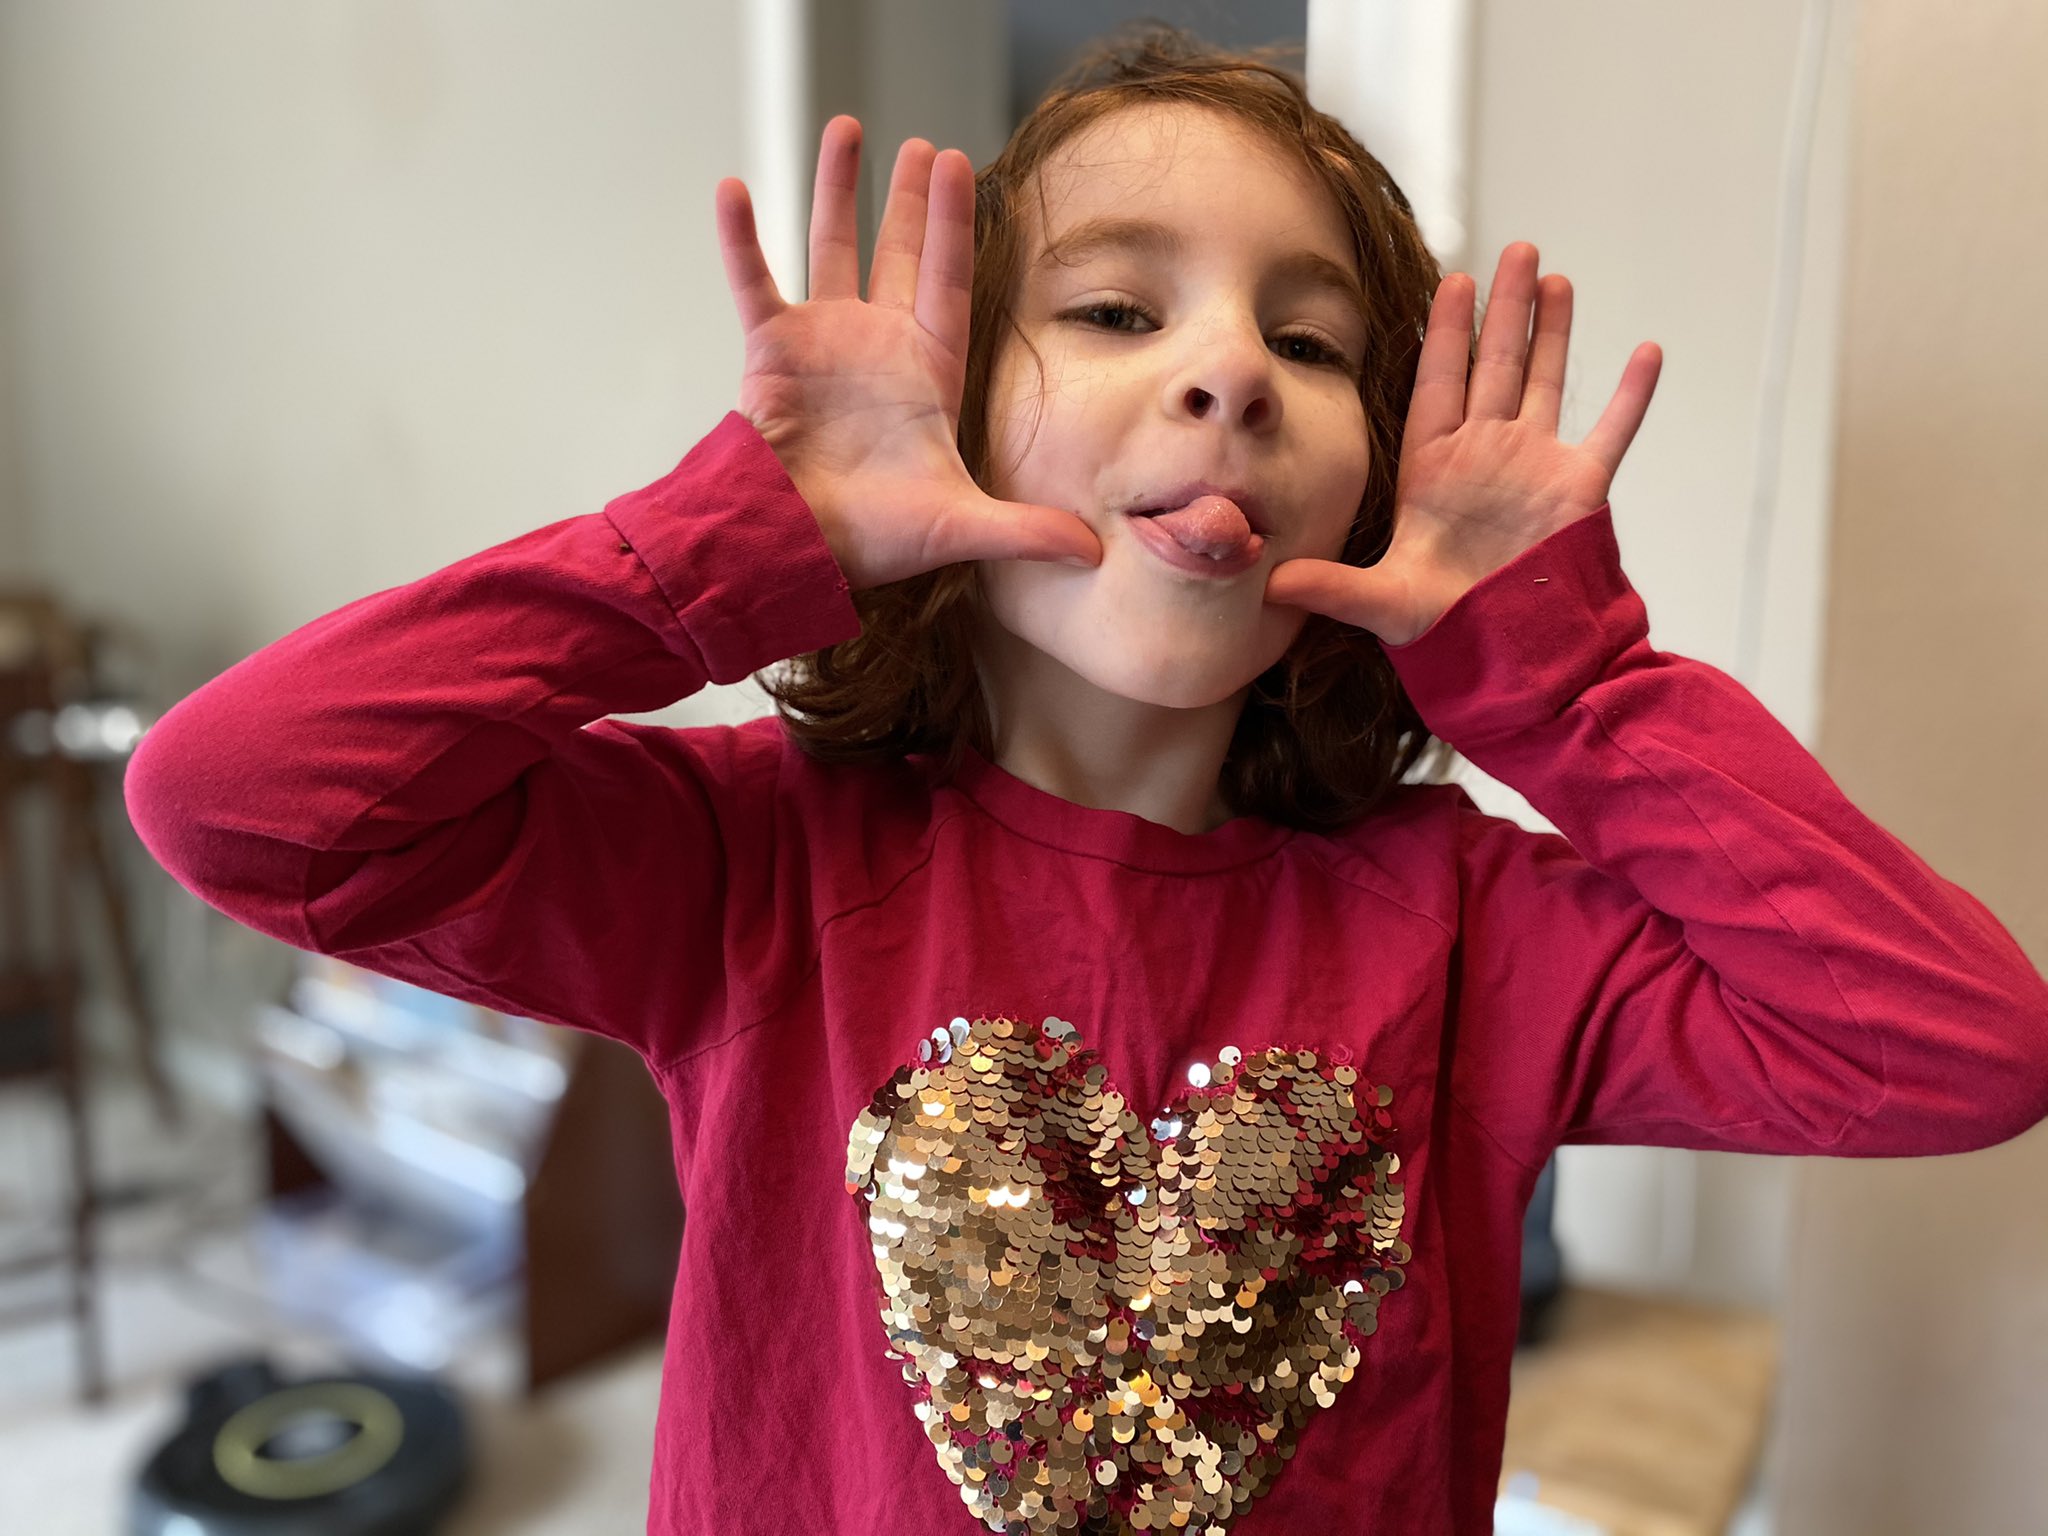 Five year old puts up both her hands and sticks out her tongue.